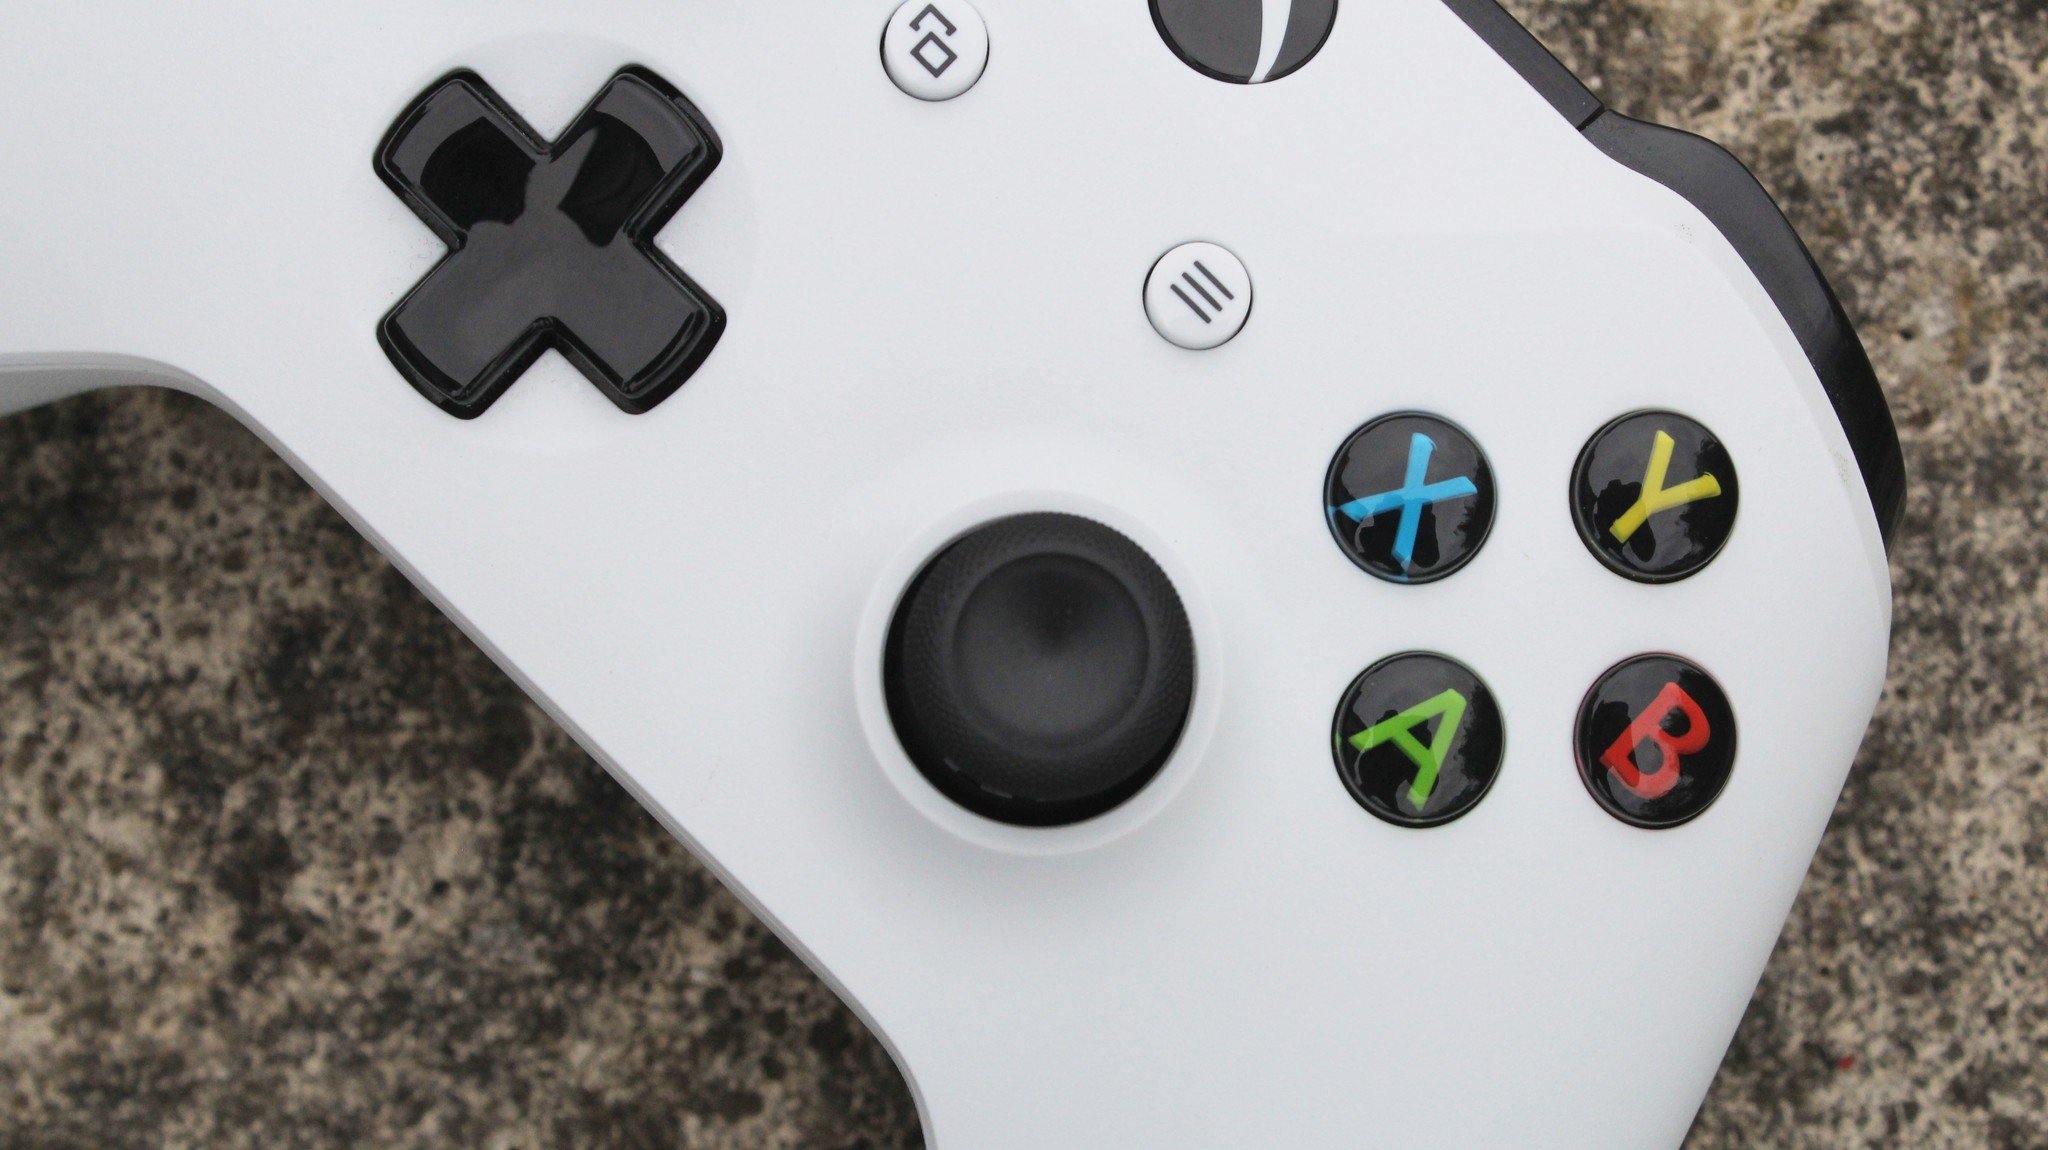 Interactie Sitcom plaats How to use an Xbox controller on Android | Android Central